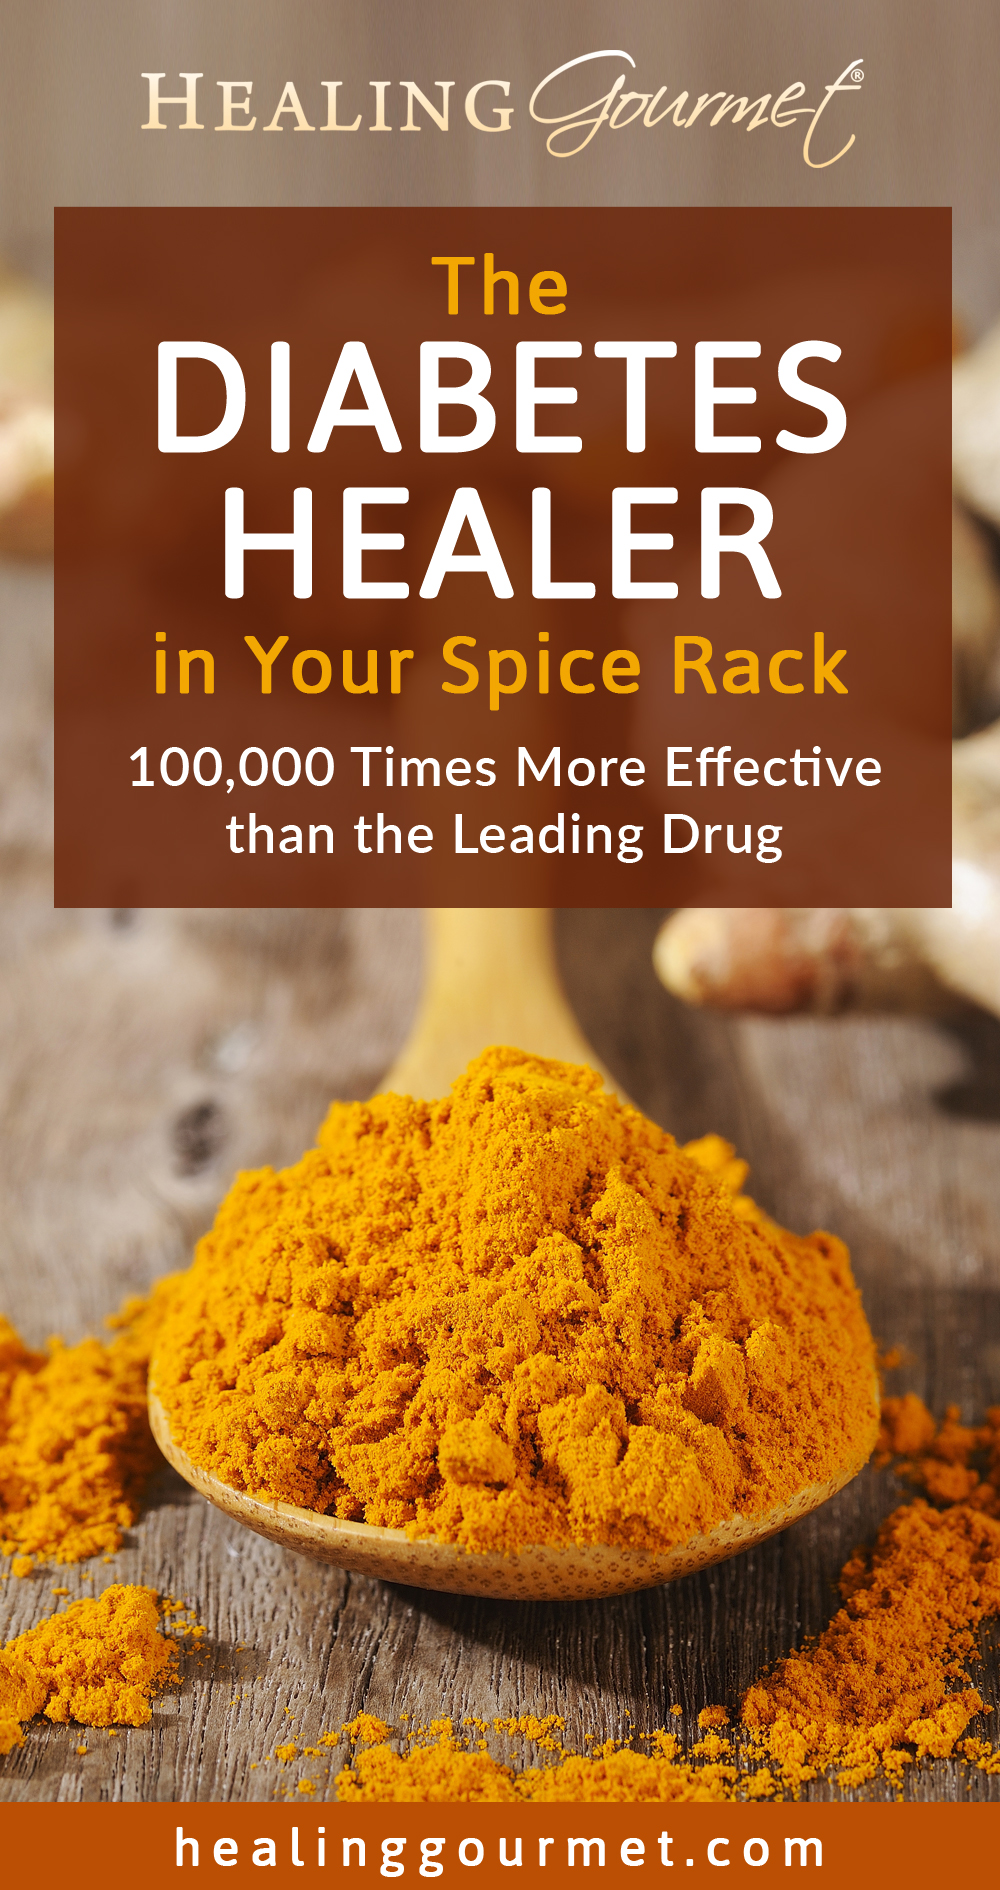 Turmeric for Diabetes - The Natural Treatment Masquerading as an Everyday Spice